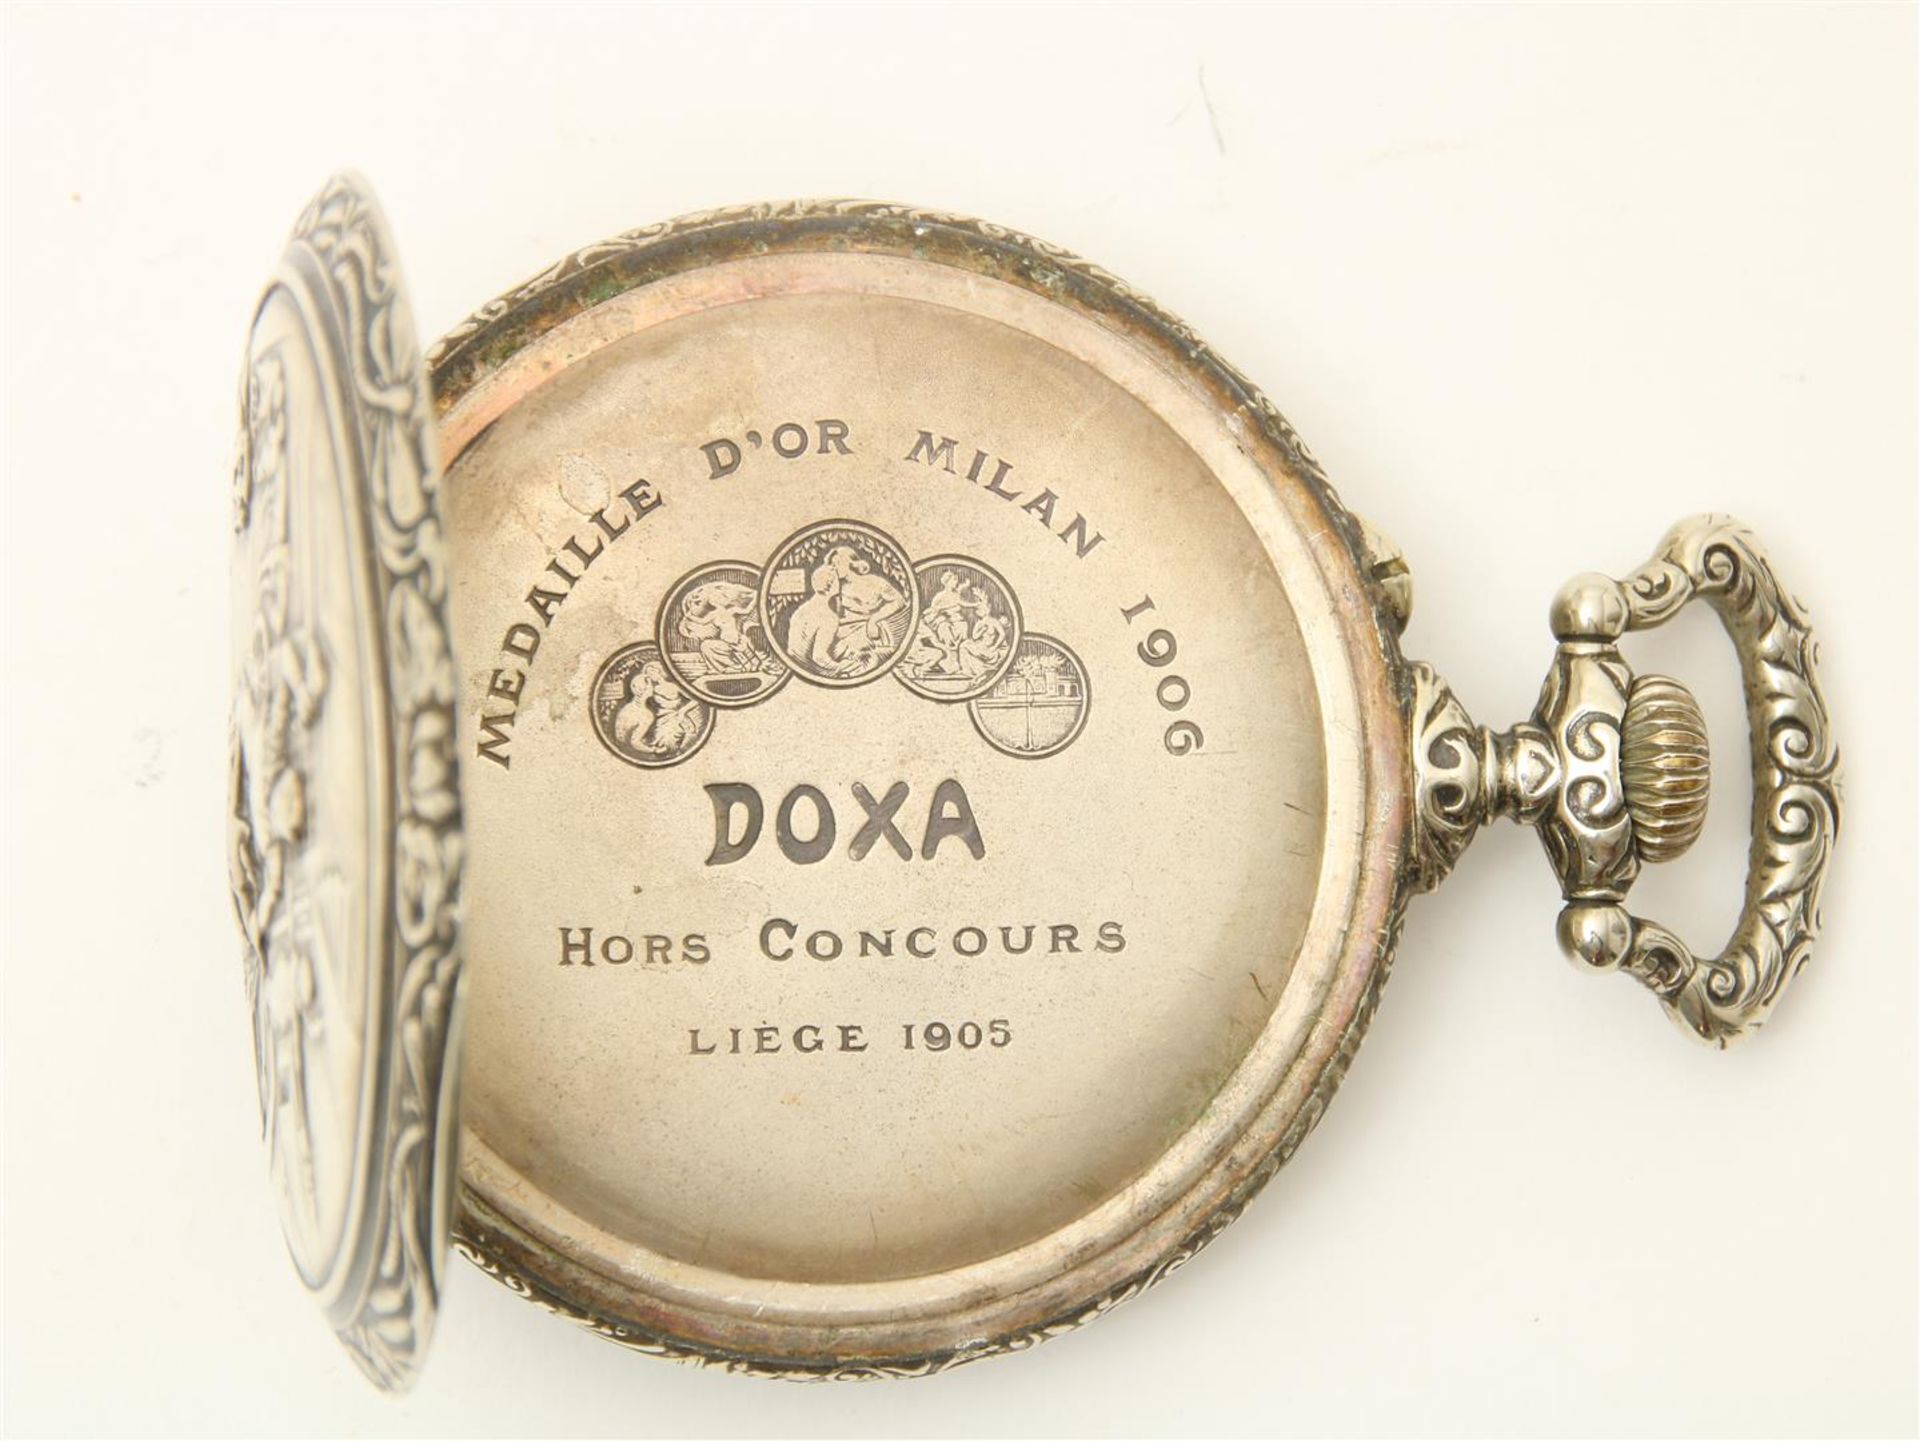 Silver pocket watch, with a lid with forge on the back, address: Doxa, Liege 1905, engraved on the - Image 3 of 4